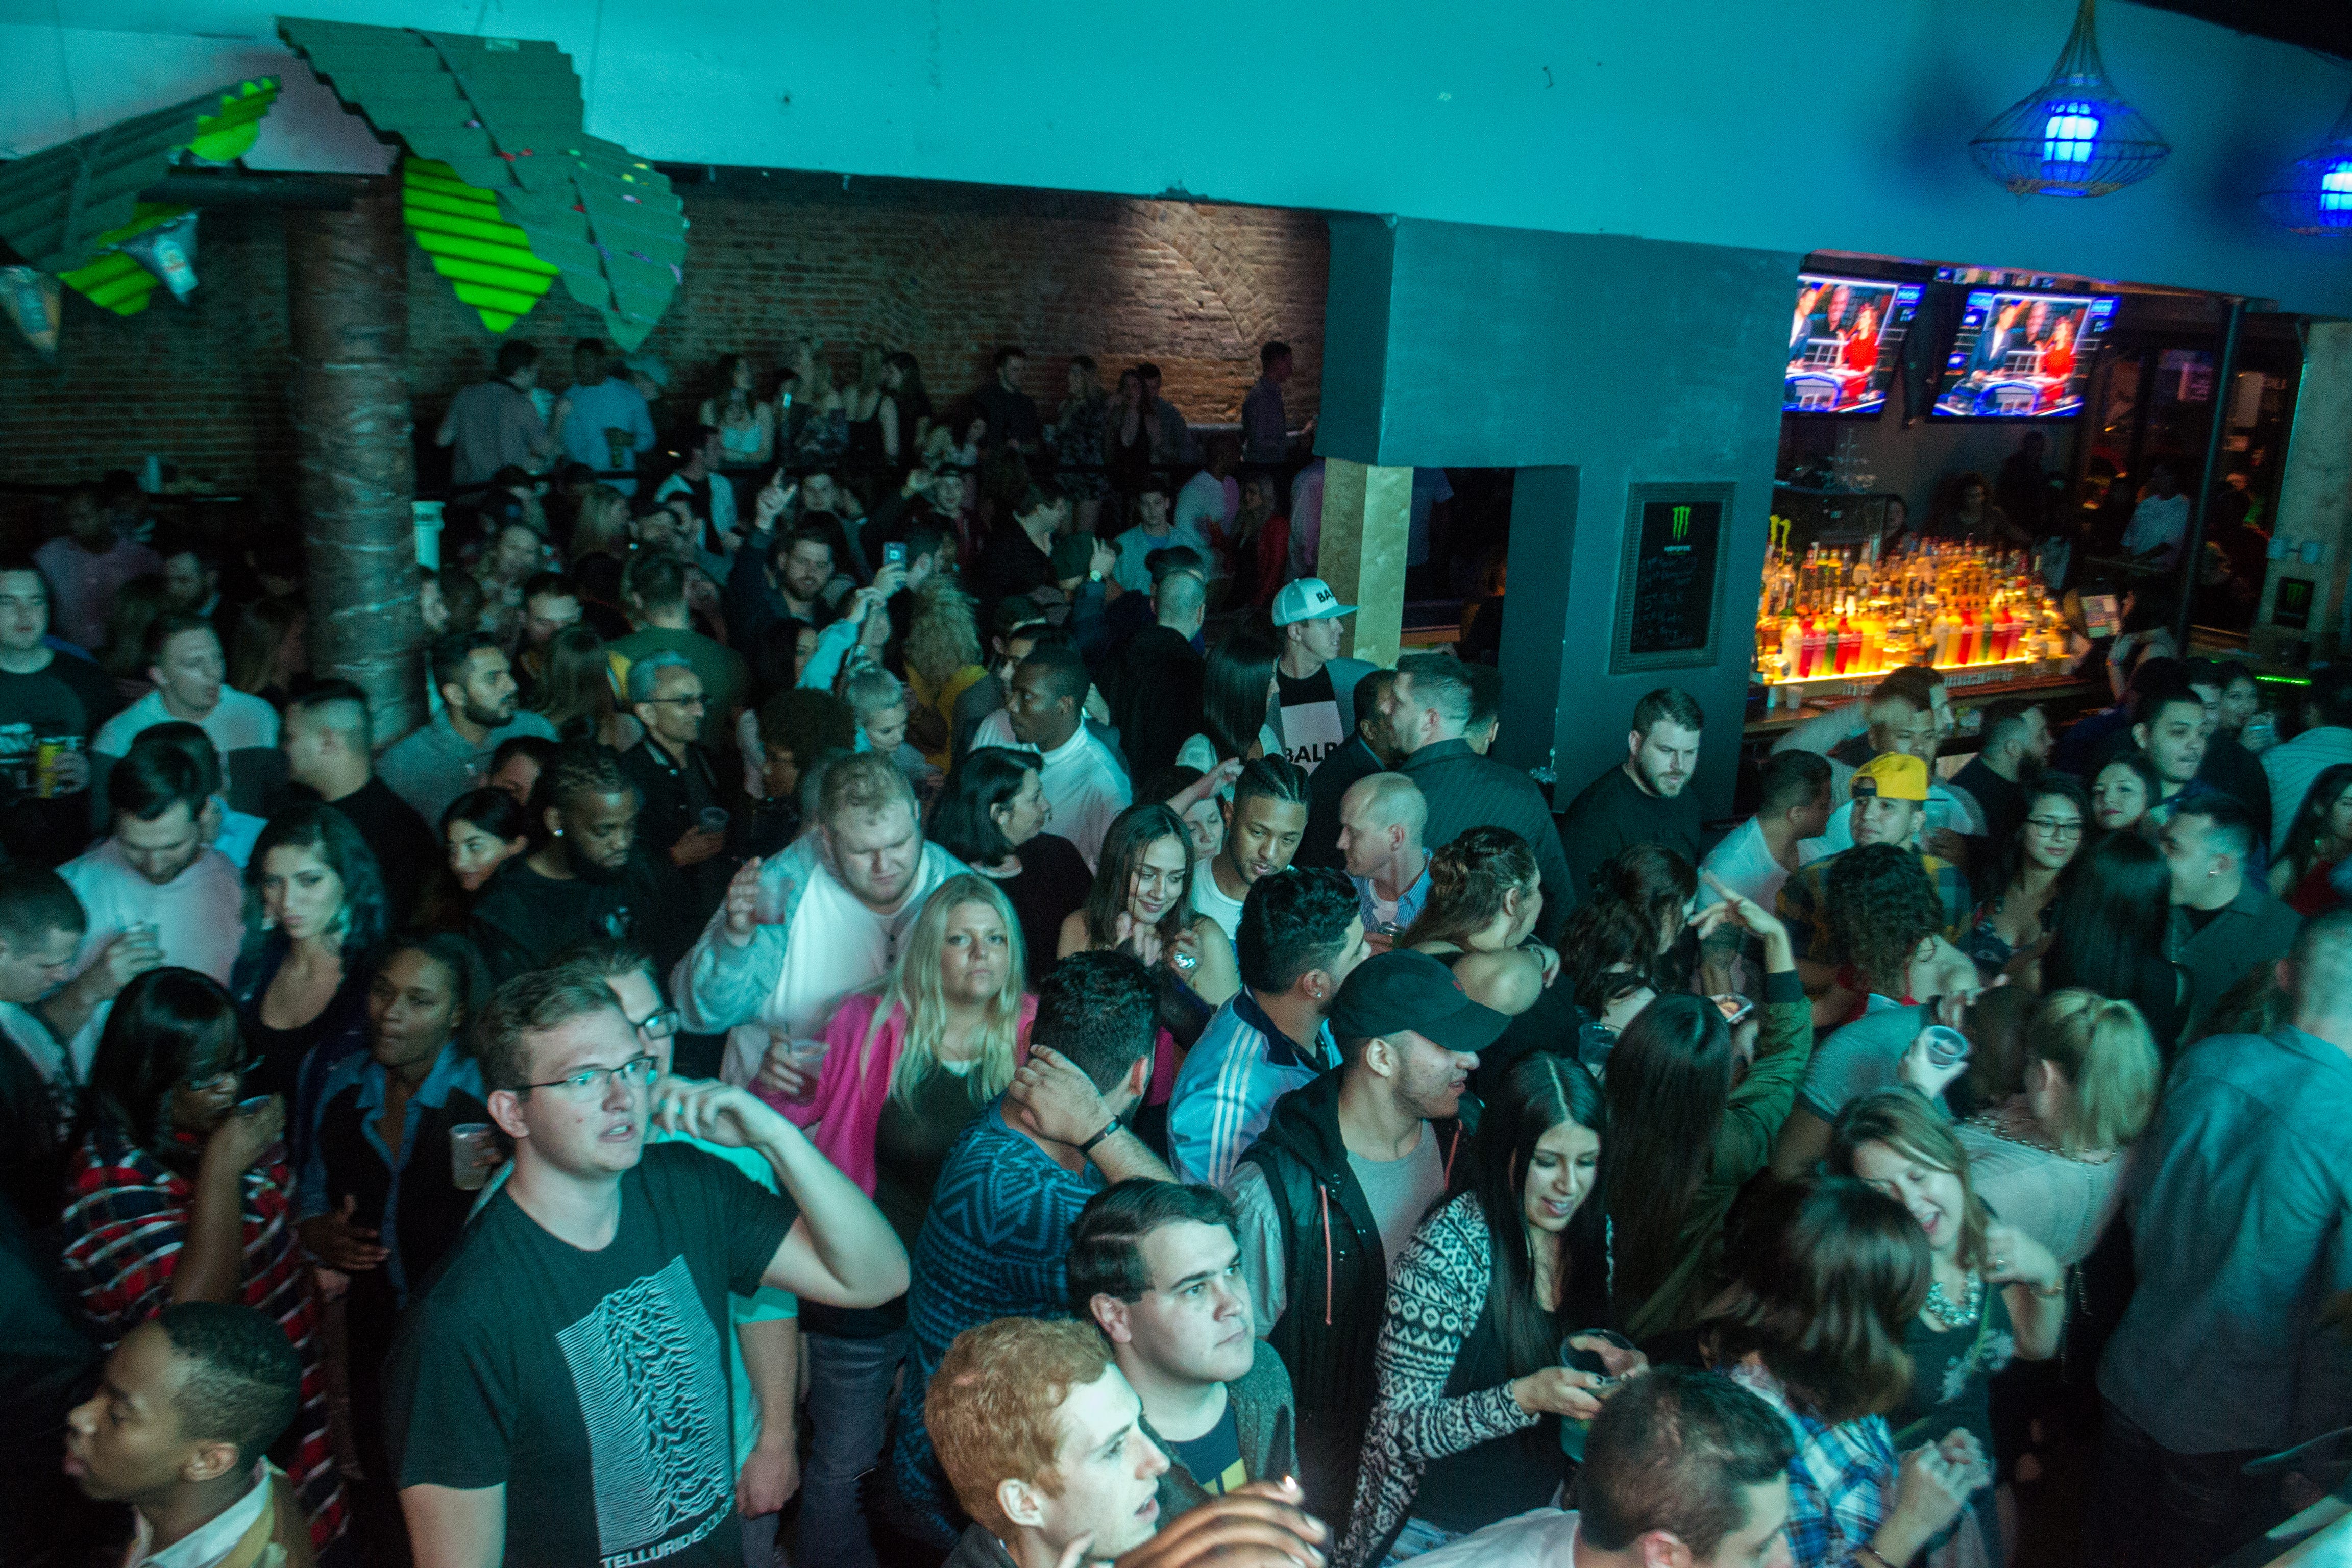 A packed crowd parties to a throbbing DJ show inside Tiki Bob's in this photo from before the pandemic.